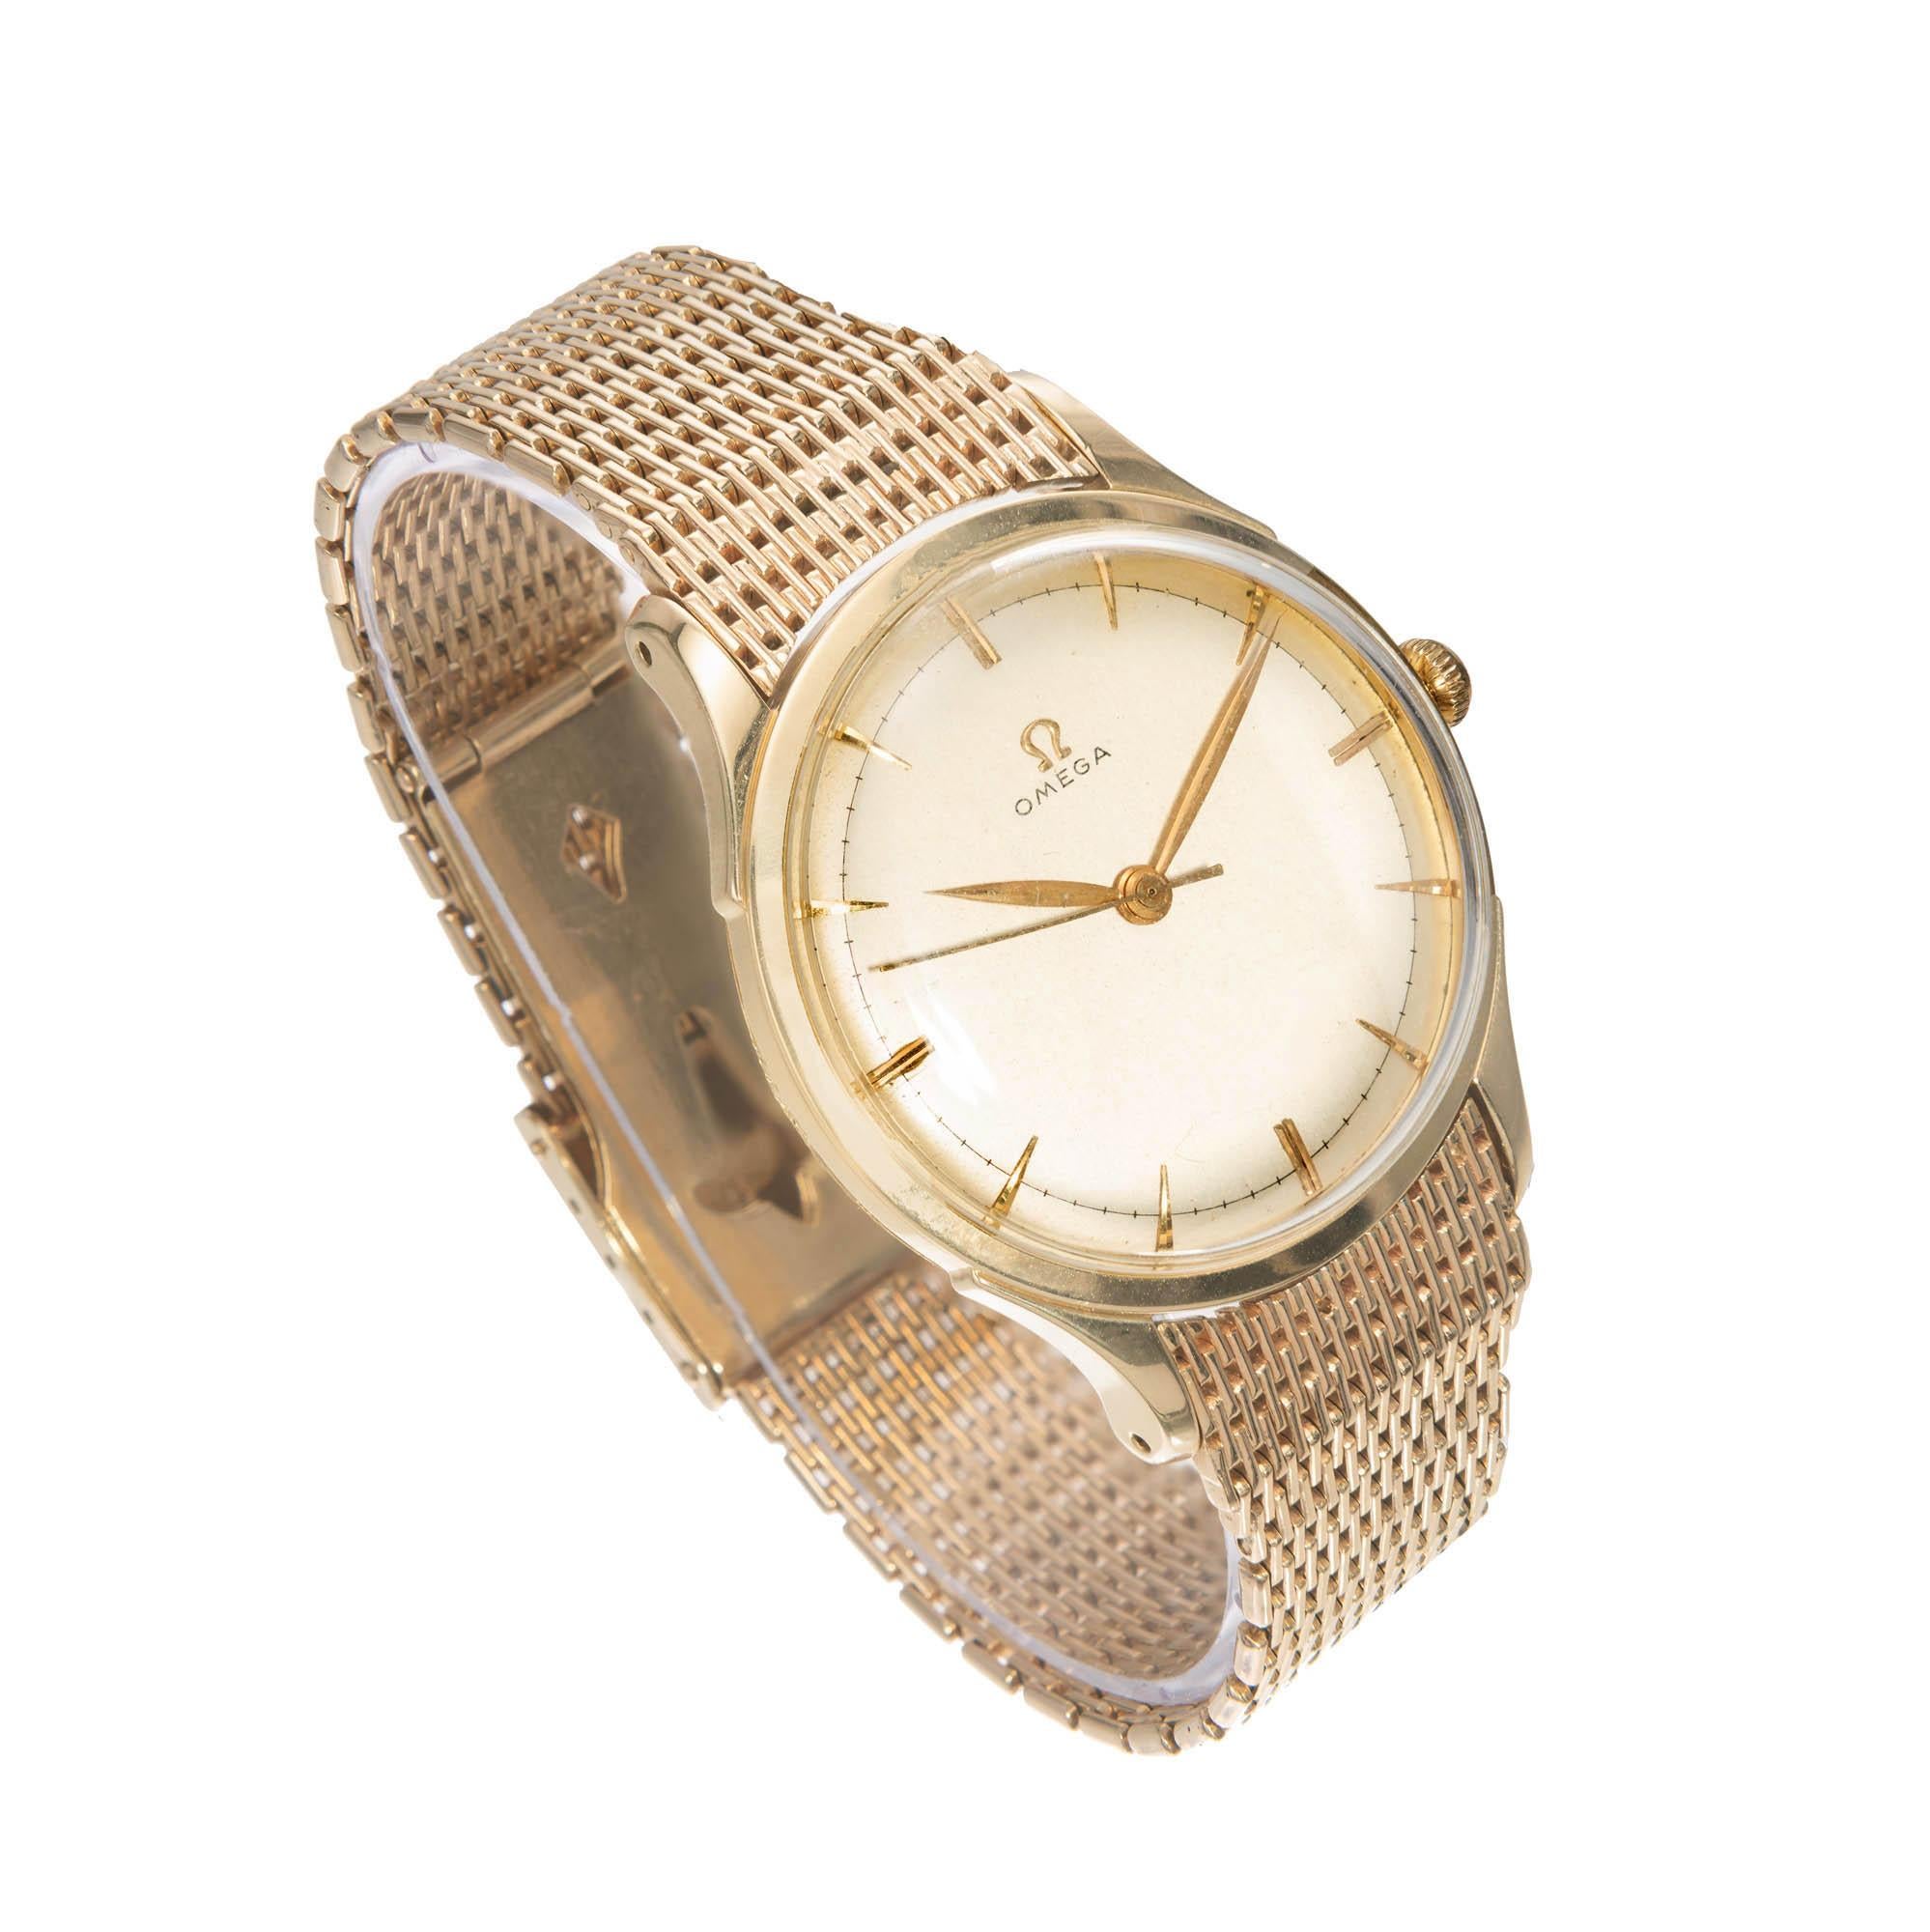 Classic 1950’s mens 14k yellow gold Omega 371 manual wind omega movement wristwatch 

14k Yellow Gold
74.9 Grams
Length: 43.25
Width: 35mm
Case Thickness: 9.72mm
Crystal: Acrylic 
Dial: Light champagne with gold marks
Length: 7 ½ Inches 
Inside